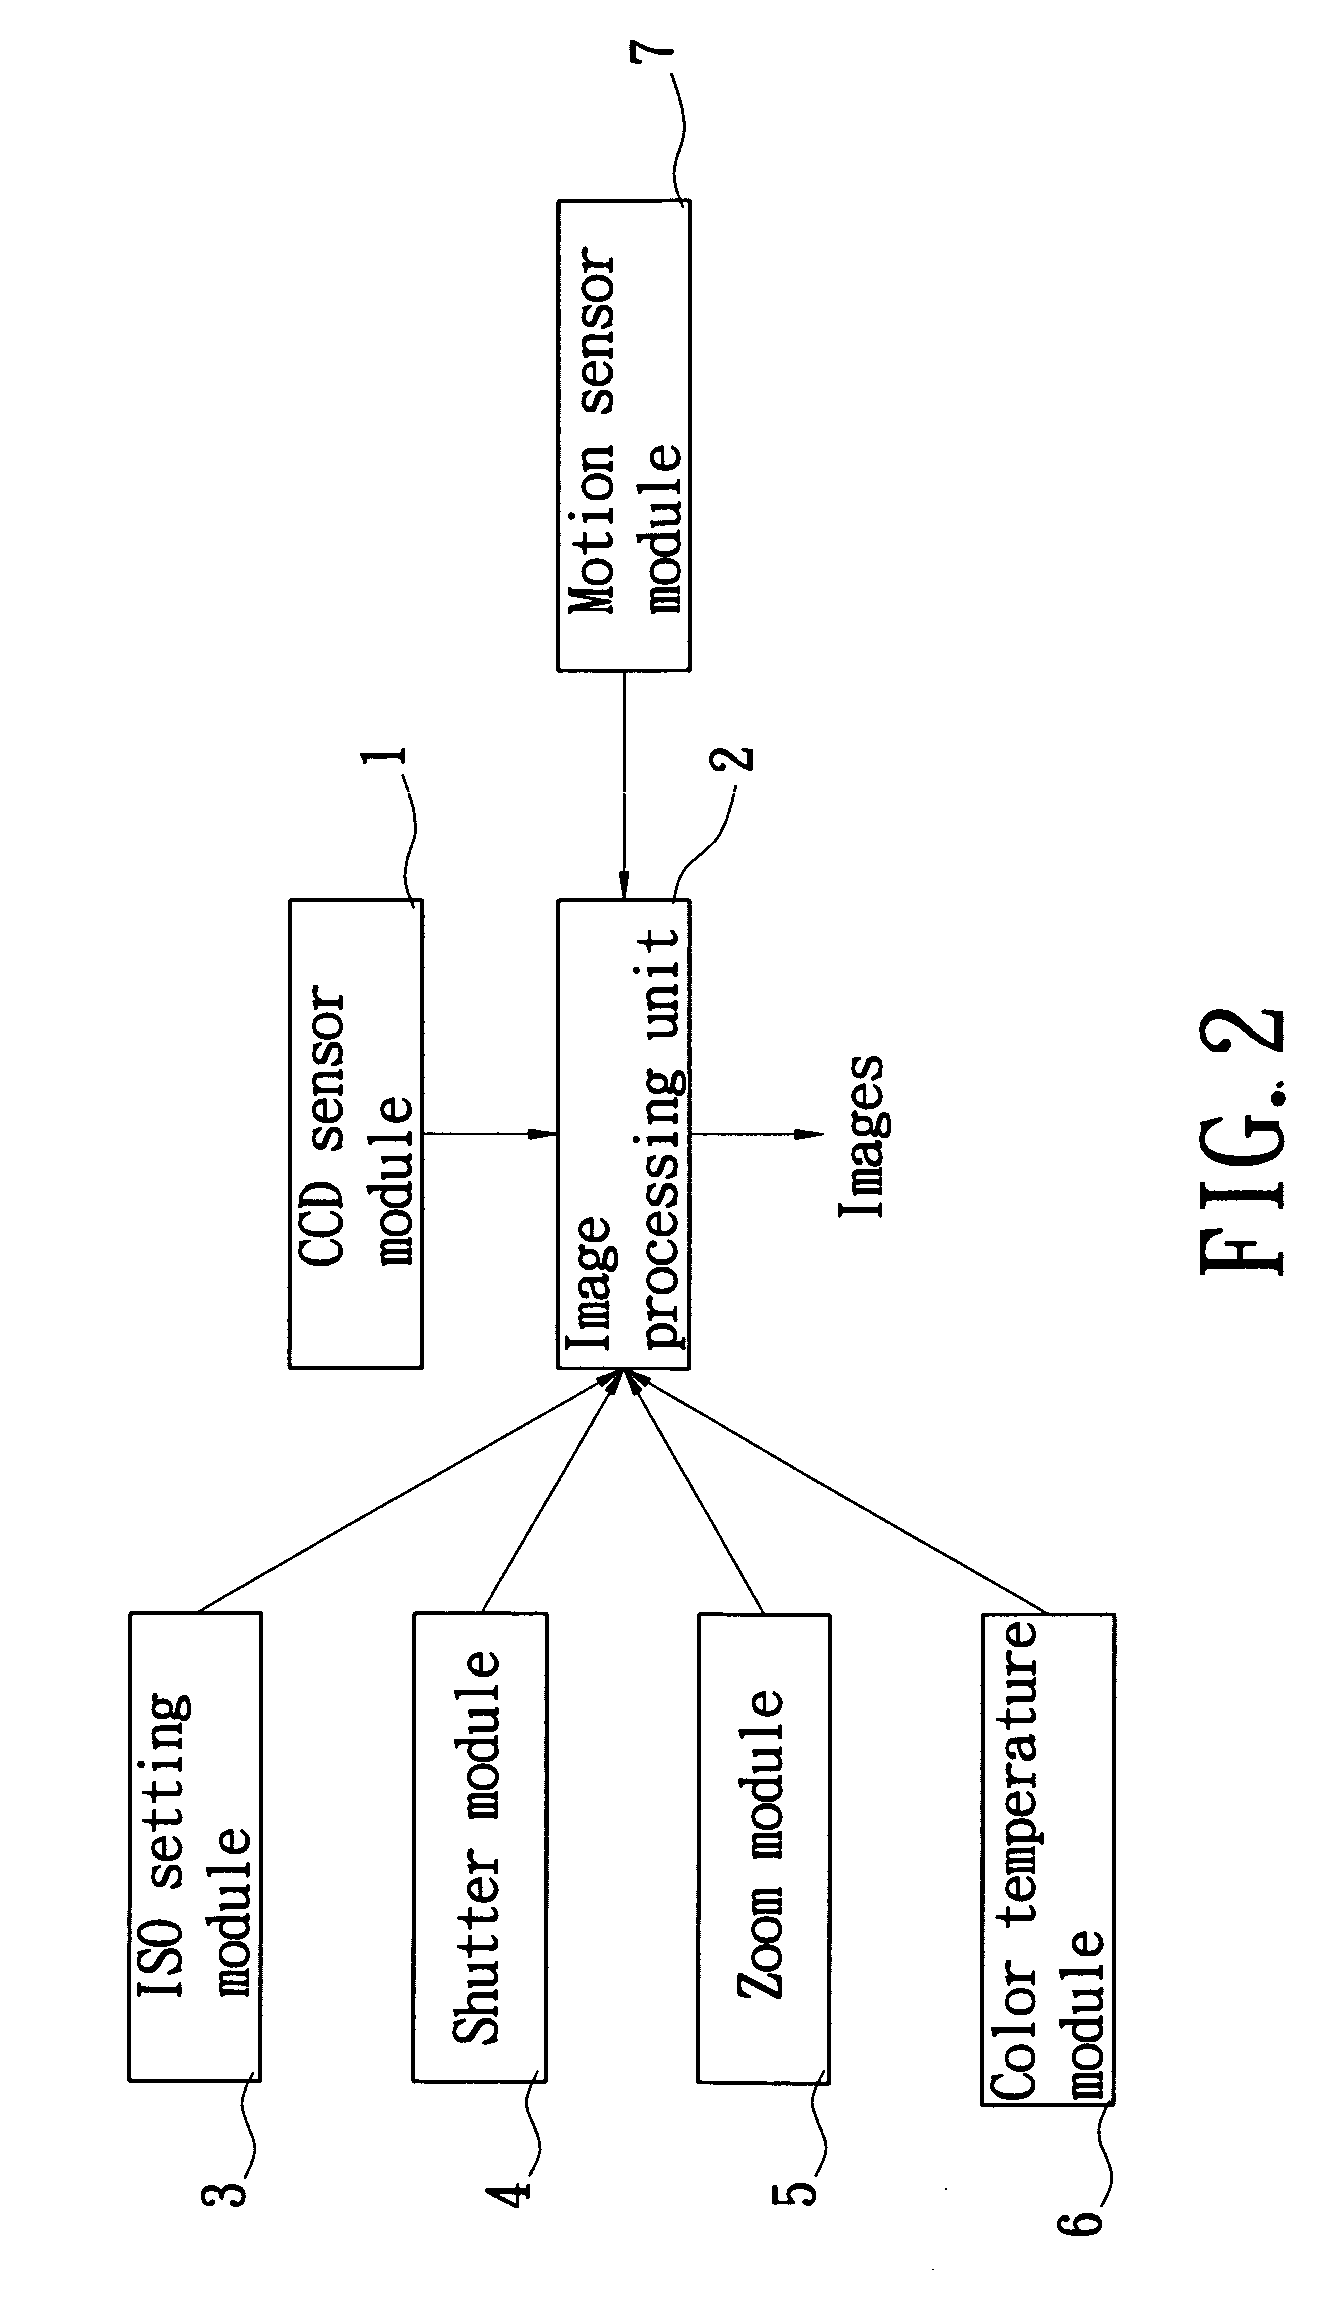 Method for determining imaging quality of a camera via a motion sensor and ISO settings